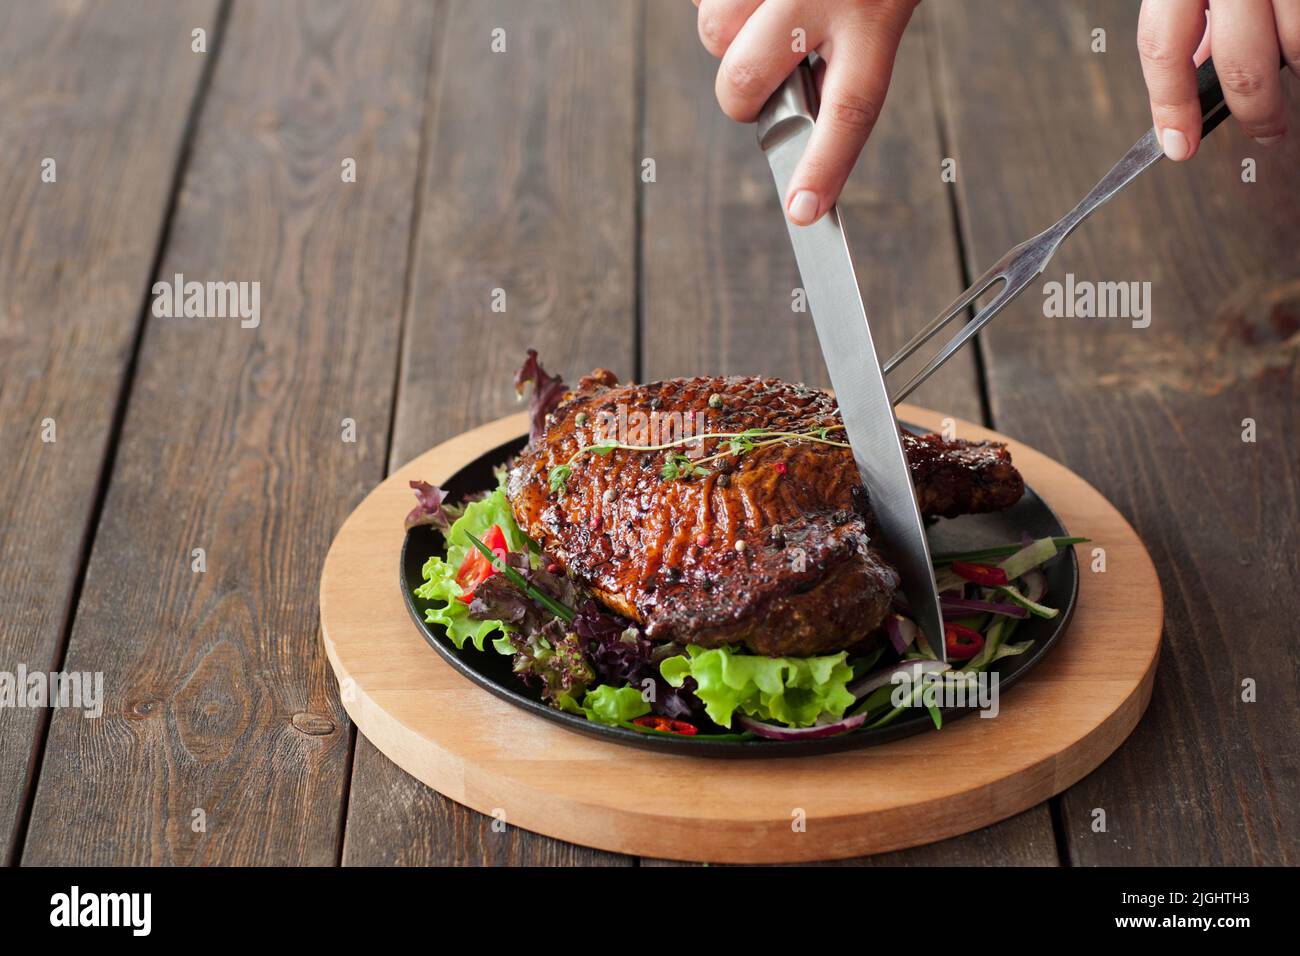 https://c8.alamy.com/comp/2JGHTH3/grilled-duck-thigh-cutting-with-cutlery-on-wooden-background-eating-at-restaurant-concept-front-view-2JGHTH3.jpg